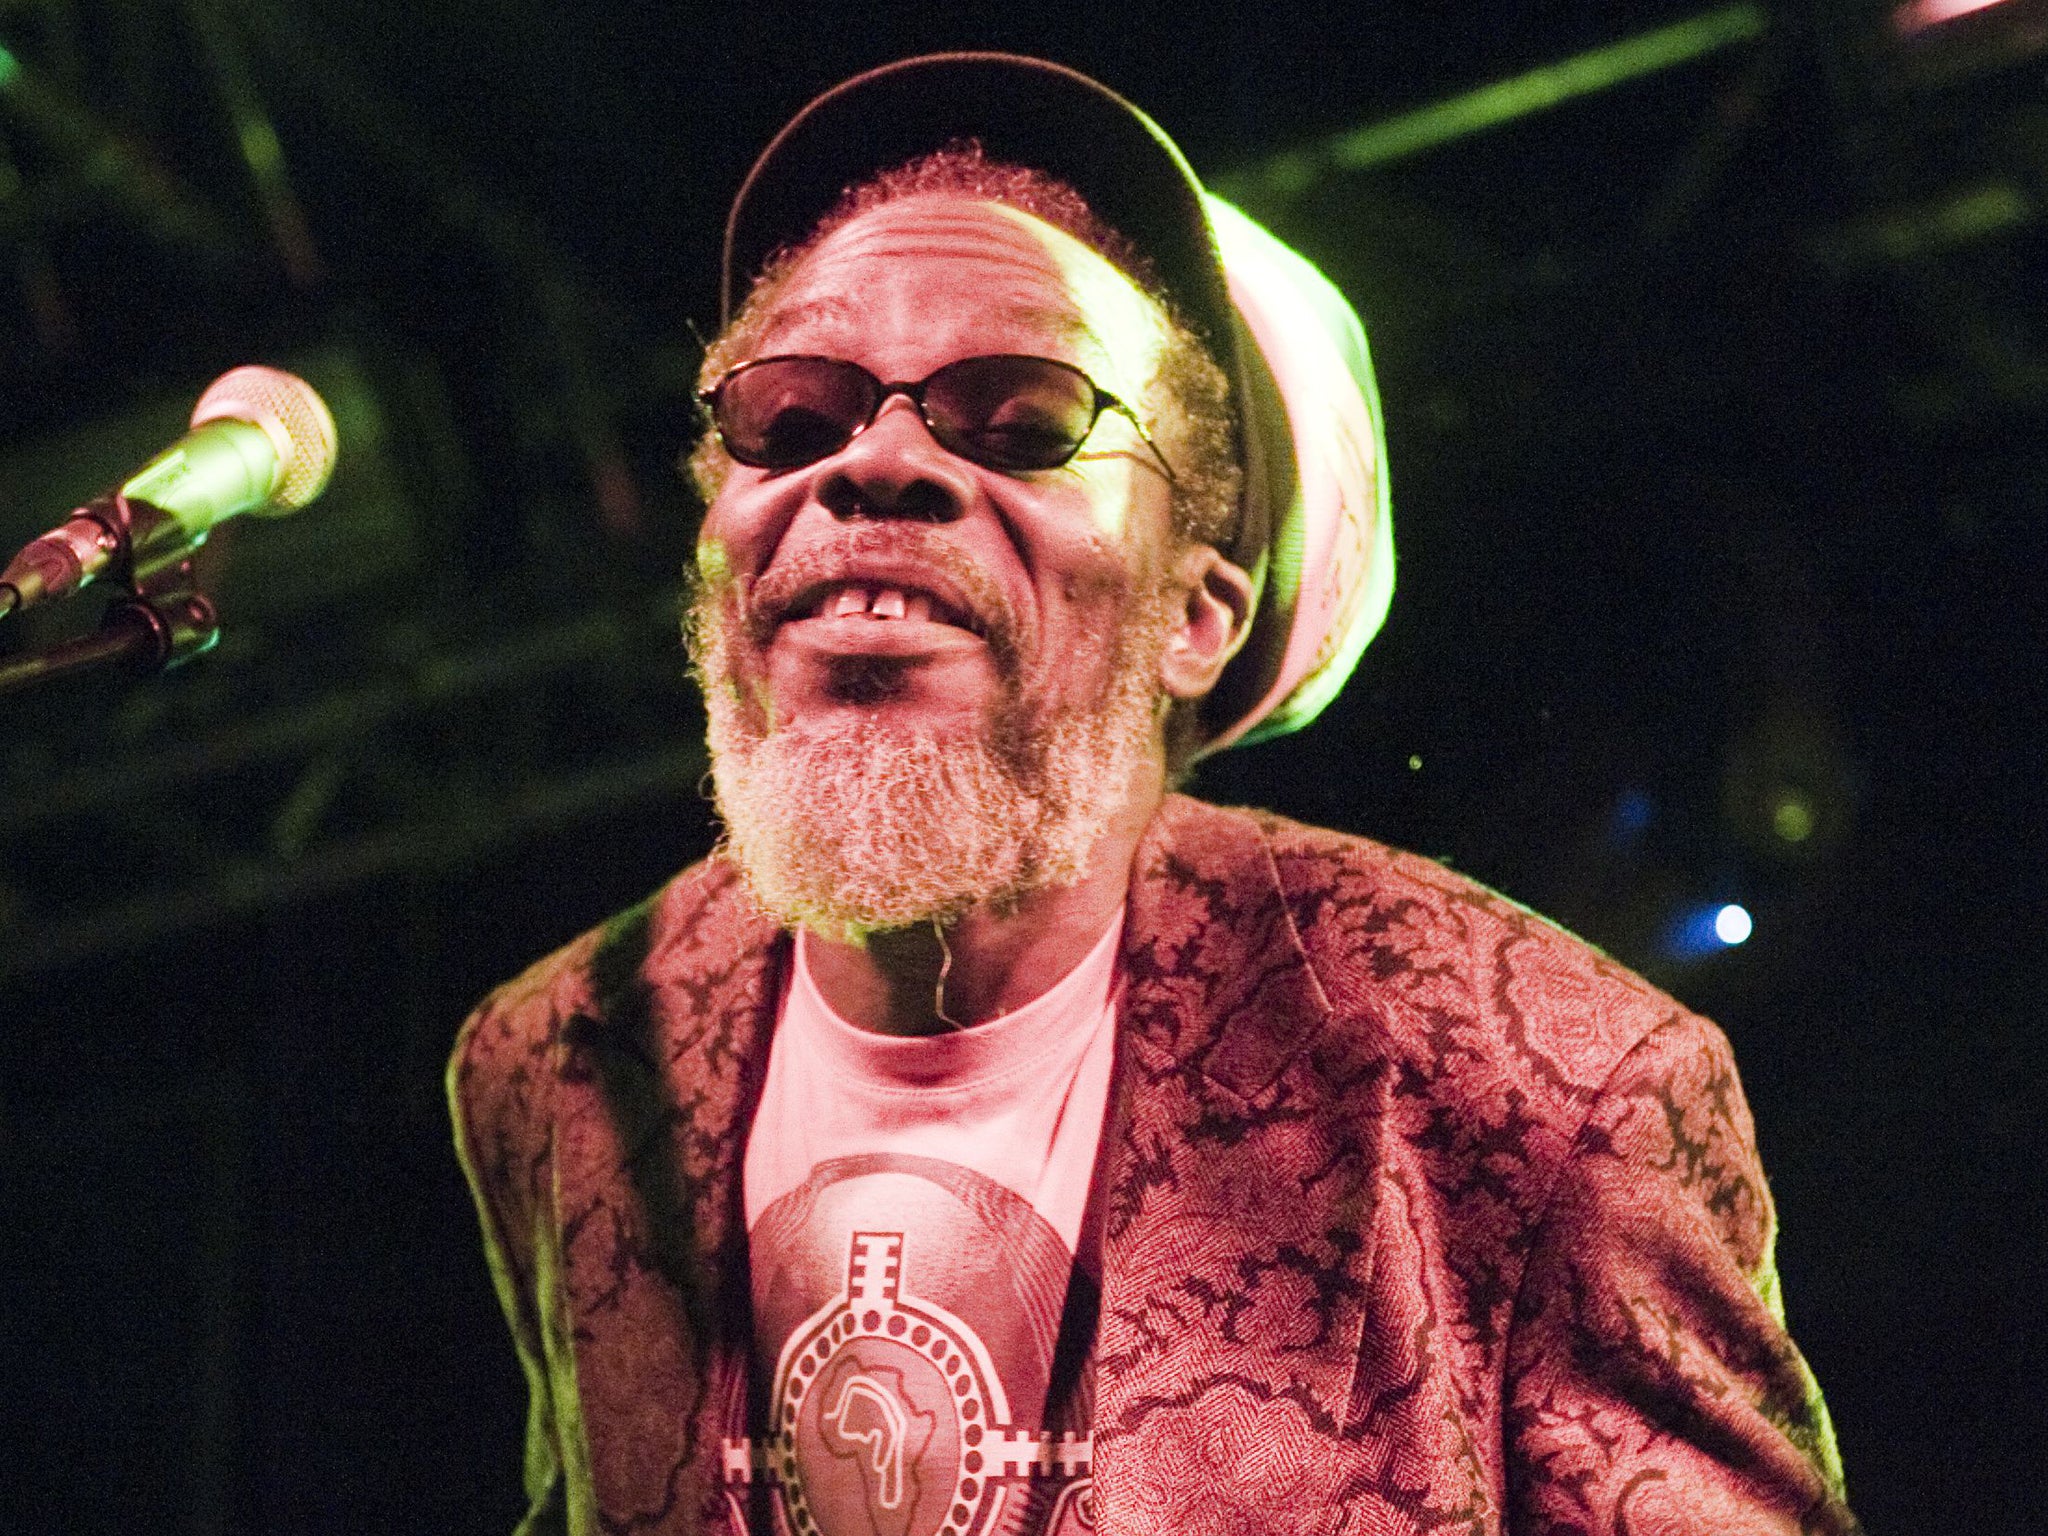 Reggae music legend Donald “Tabby” Shaw died in a drive-by shooting in Jamaica on 29 March